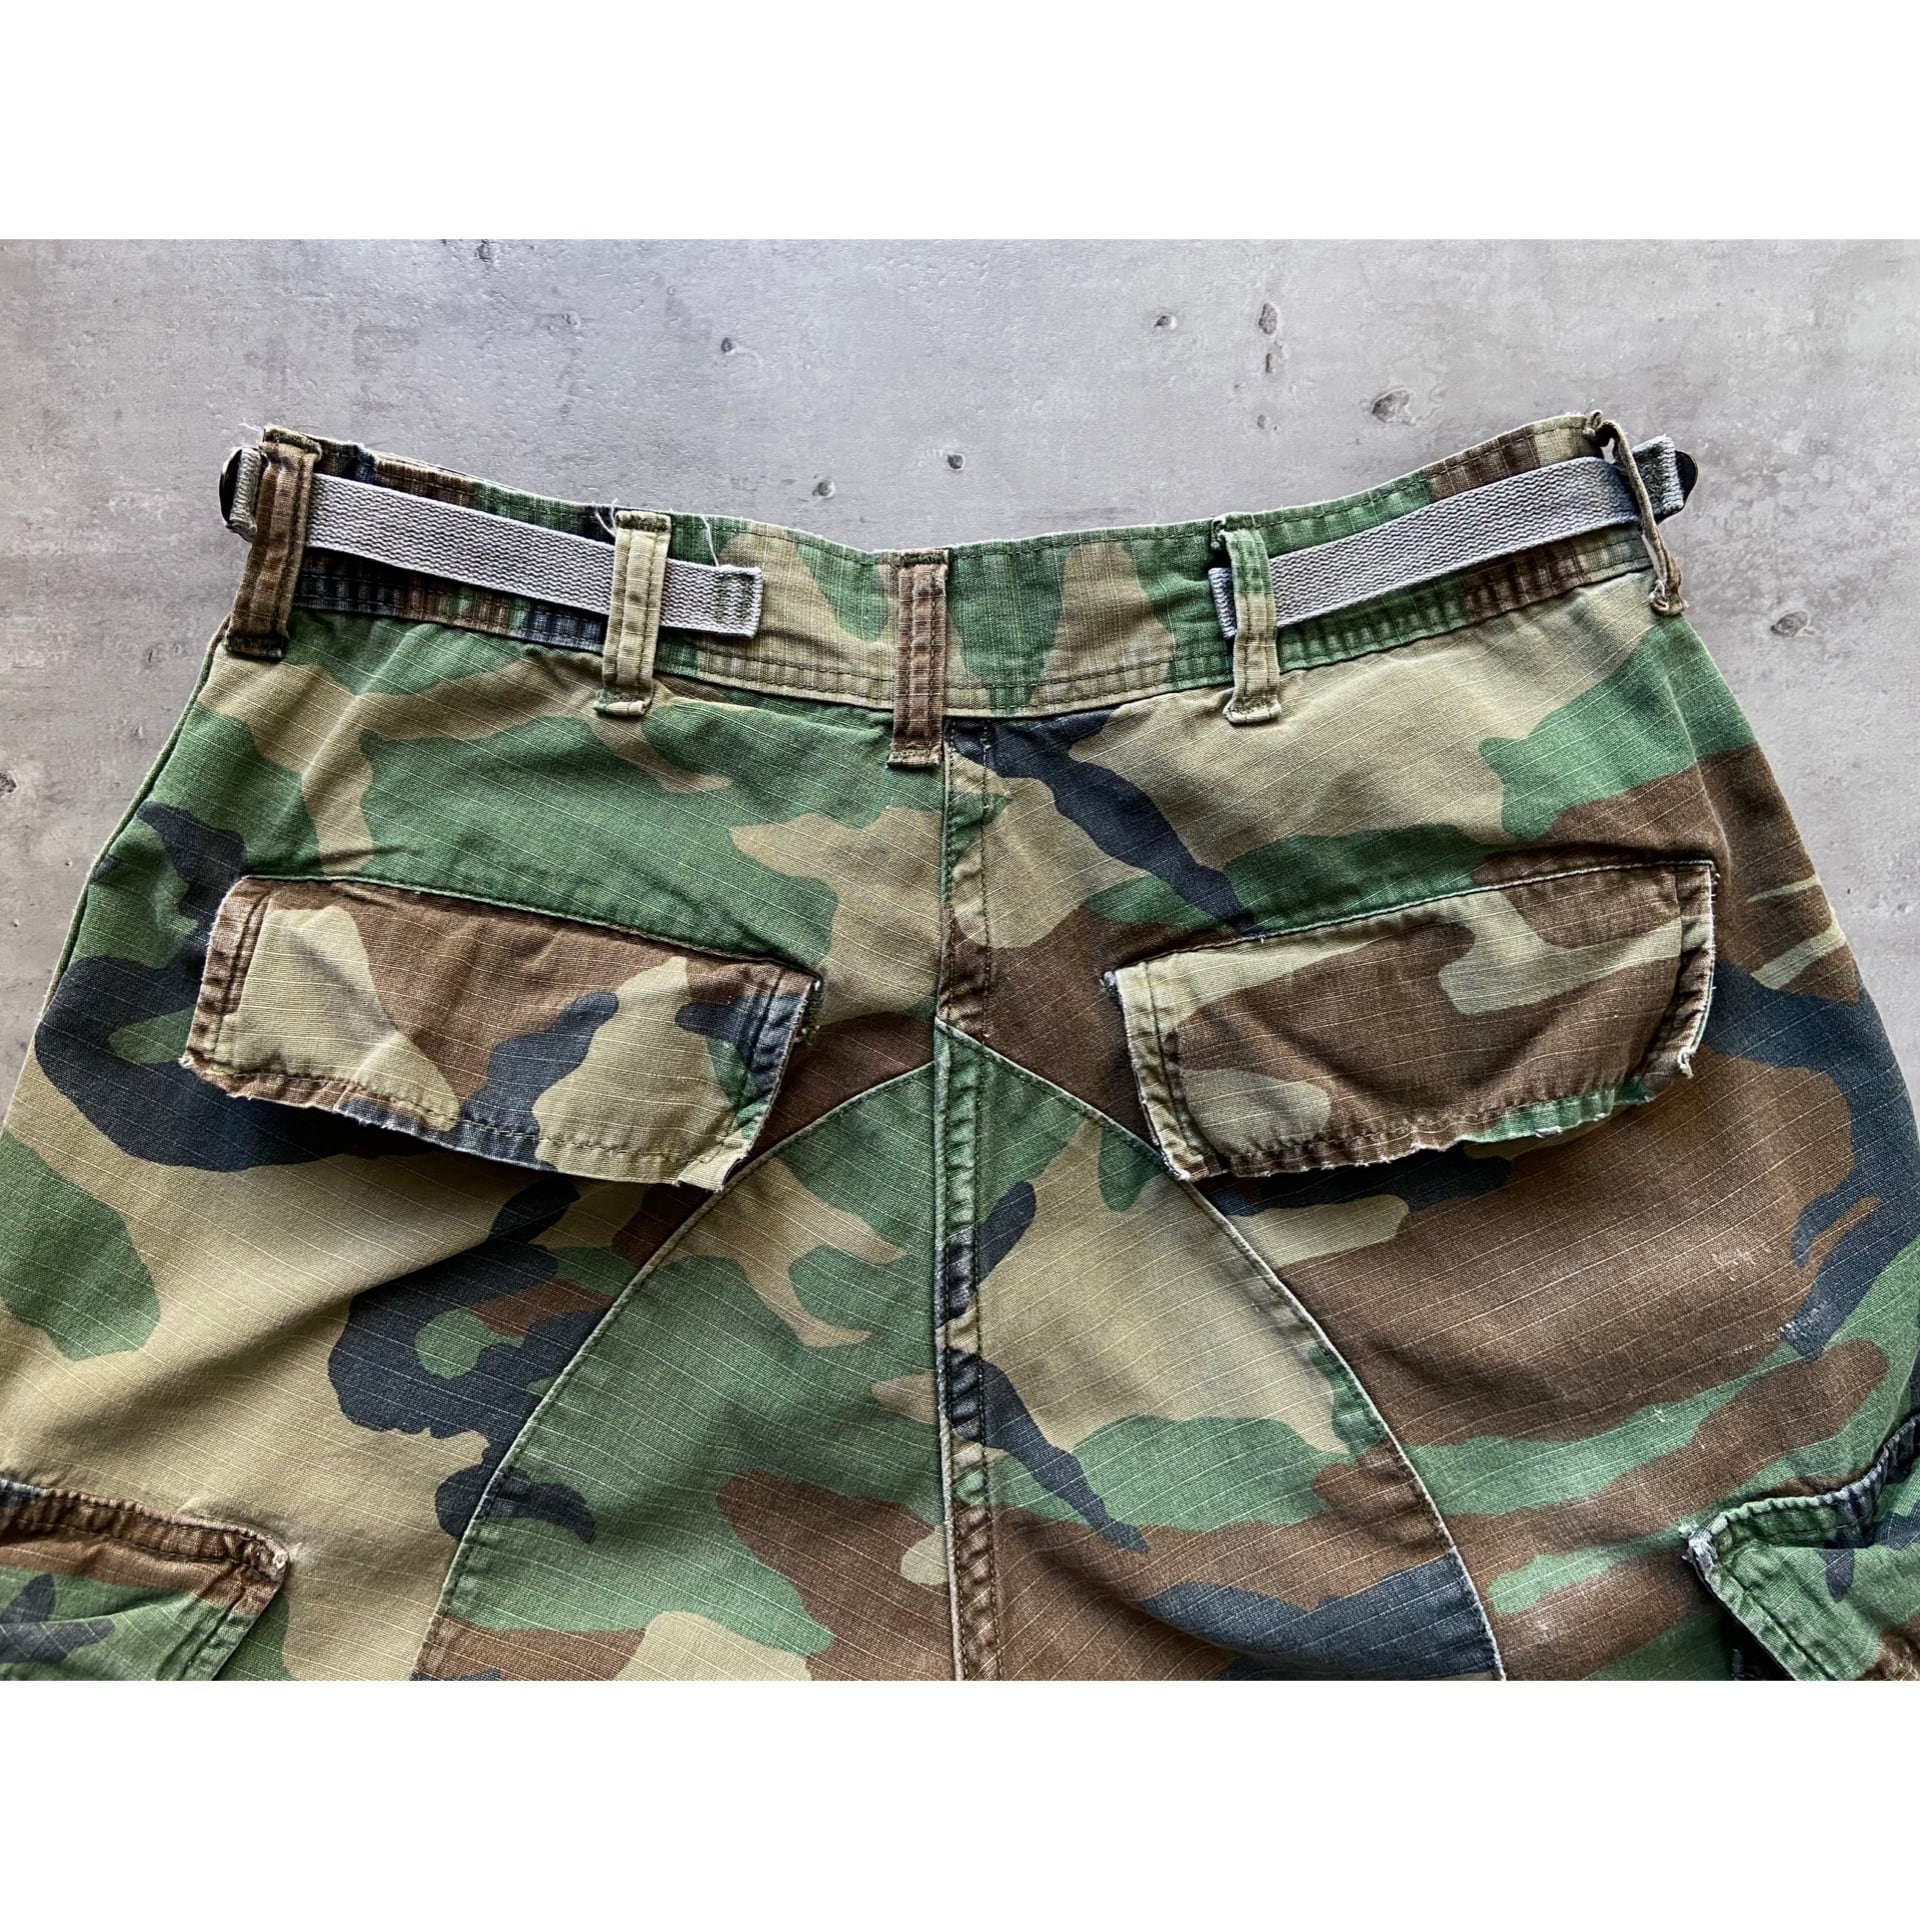 s woodland camouflage pattern combat trousers “BDU” 米軍